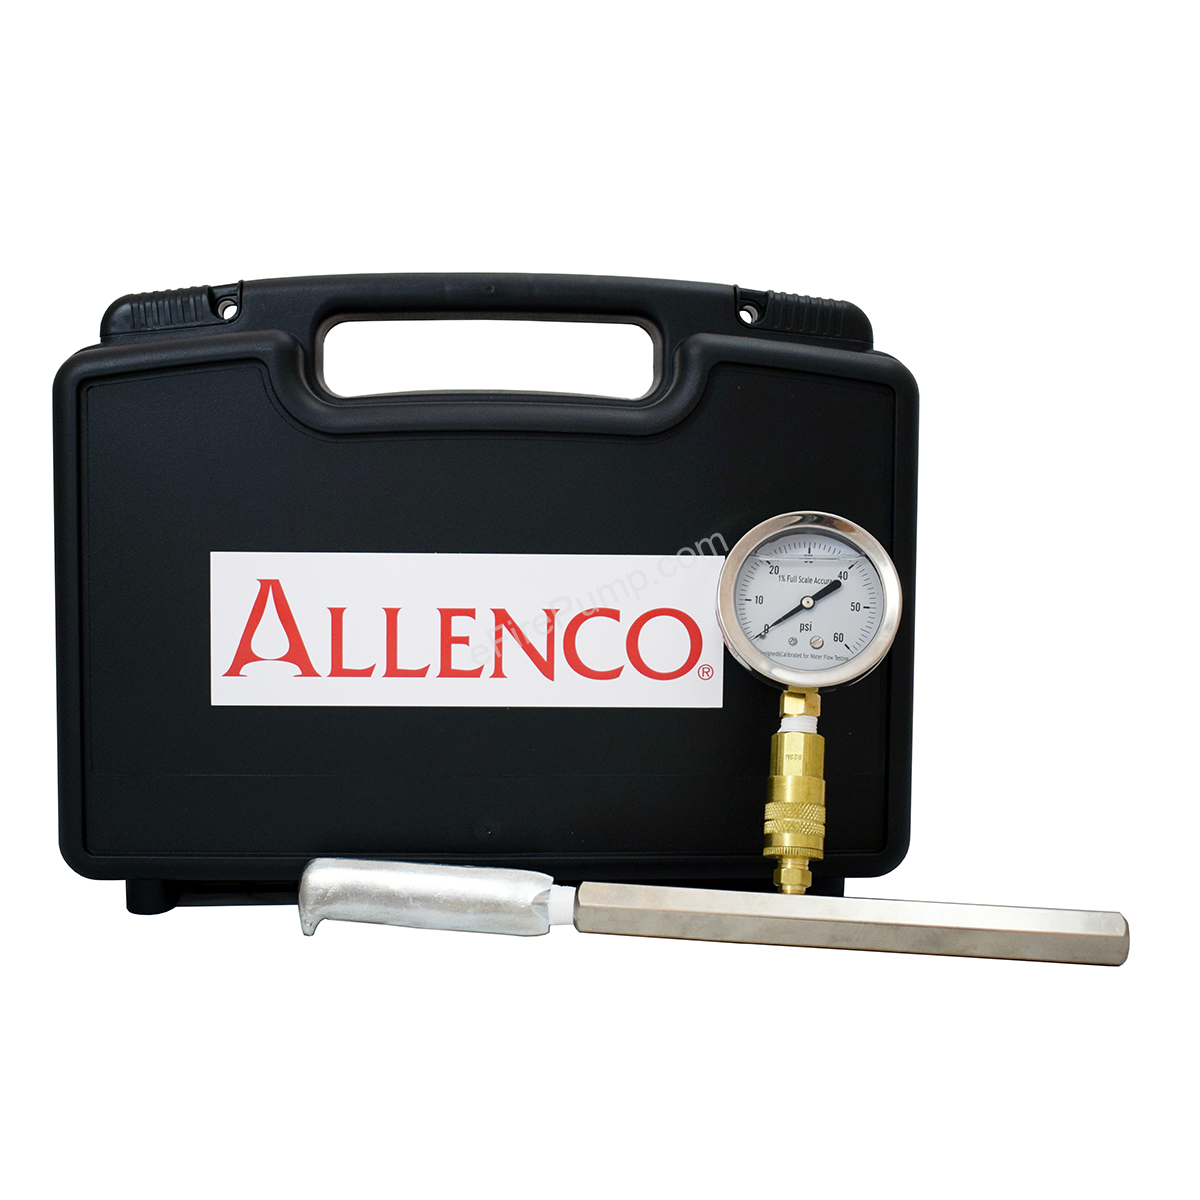 Fire Pump Packing Extractor Puller Set Allenco Pro-Pak Basic 